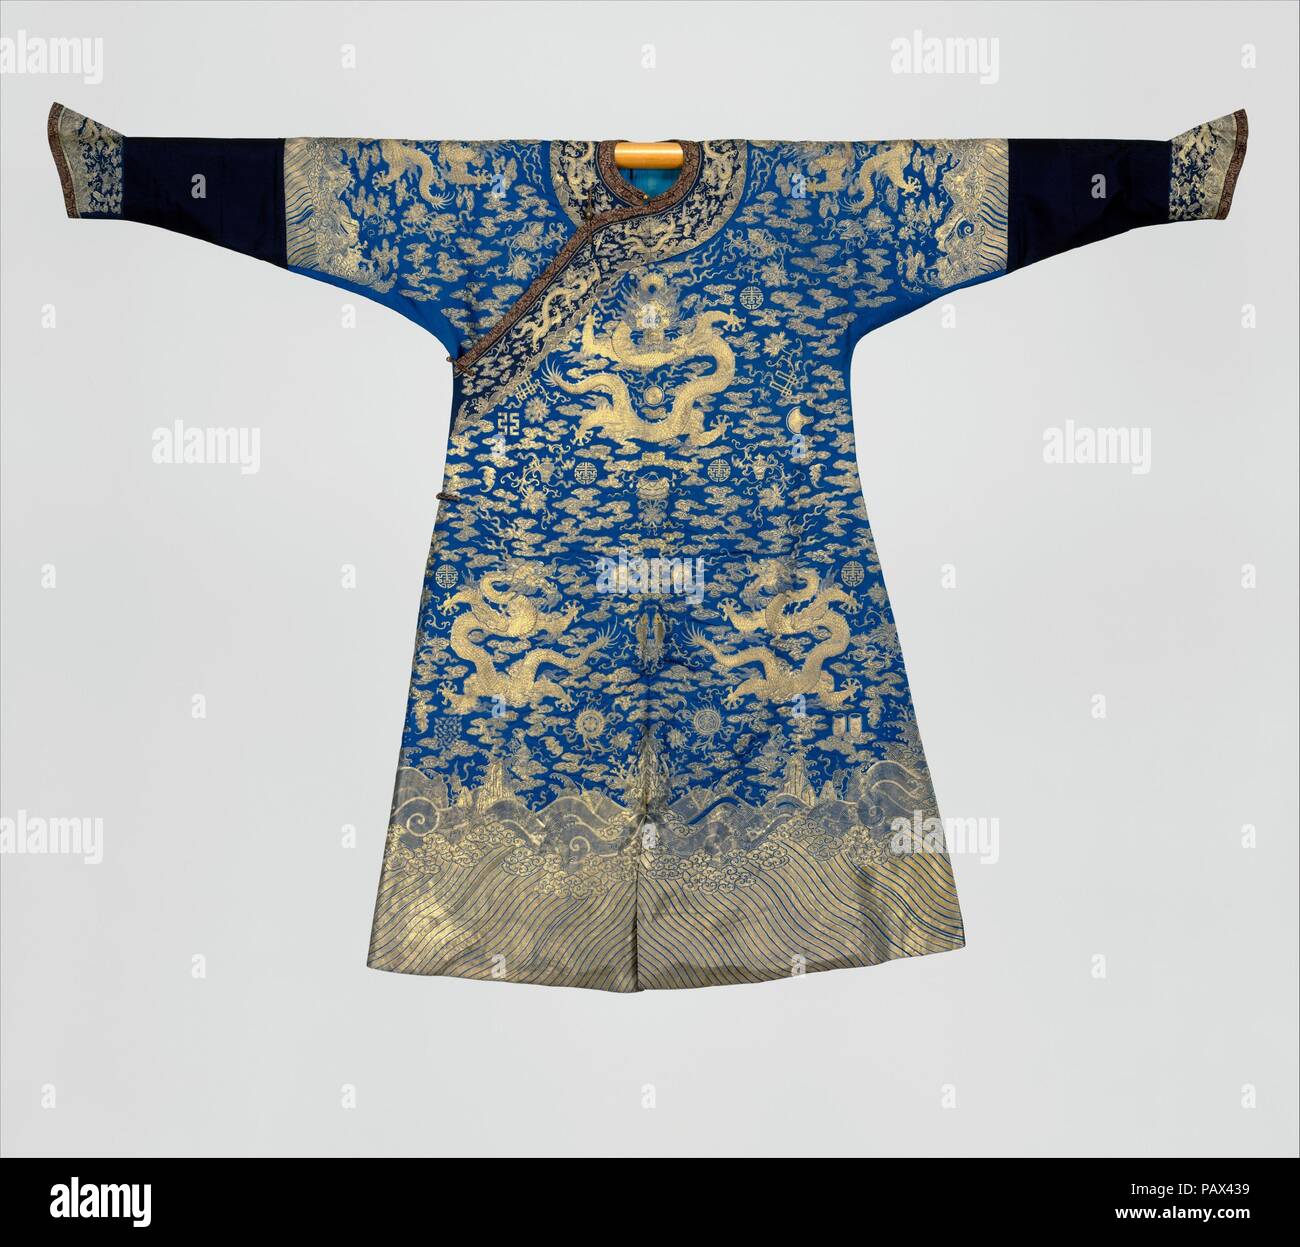 Emperor's twelve-symbol festival robe. Culture: China. Dimensions: Overall: 56 5/8 x 63 1/2 in. (143.8 x 161.3 cm).  Official costumes in imperial China were highly regulated, and the decorative motifs of court outfits were specific to rank. Among the emblems used on the emperor's ceremonial robes were the twelve imperial symbols, as seen on this example: the sun, the moon, constellations, mountains, a pair of dragons, birds, ritual cups, water weeds, millet, fire, an ax, and the symmetrical fu symbol. These symbols, said to have been used since ancient times, represent the emperor's righteous Stock Photo